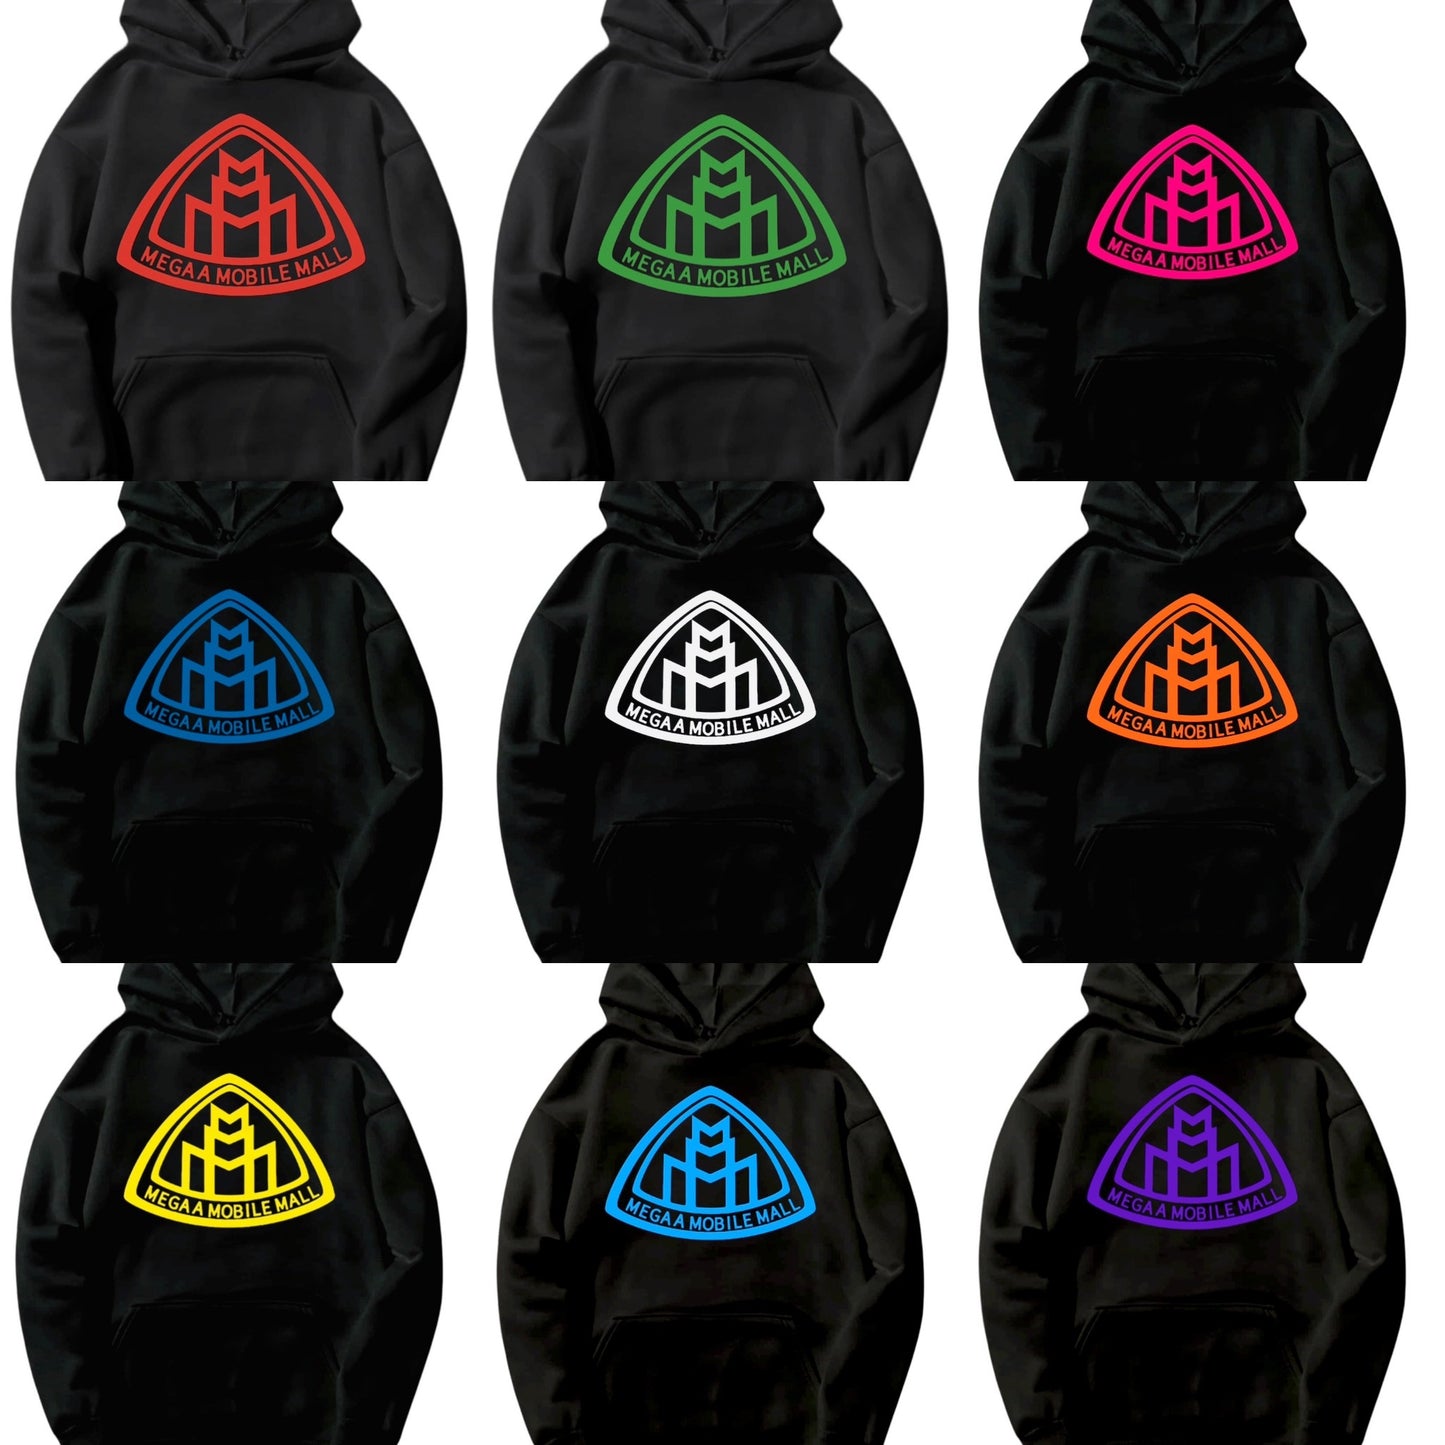 black megaamobilemall logo Heavy Blend Fleece Hoodie with 9 different logo color options